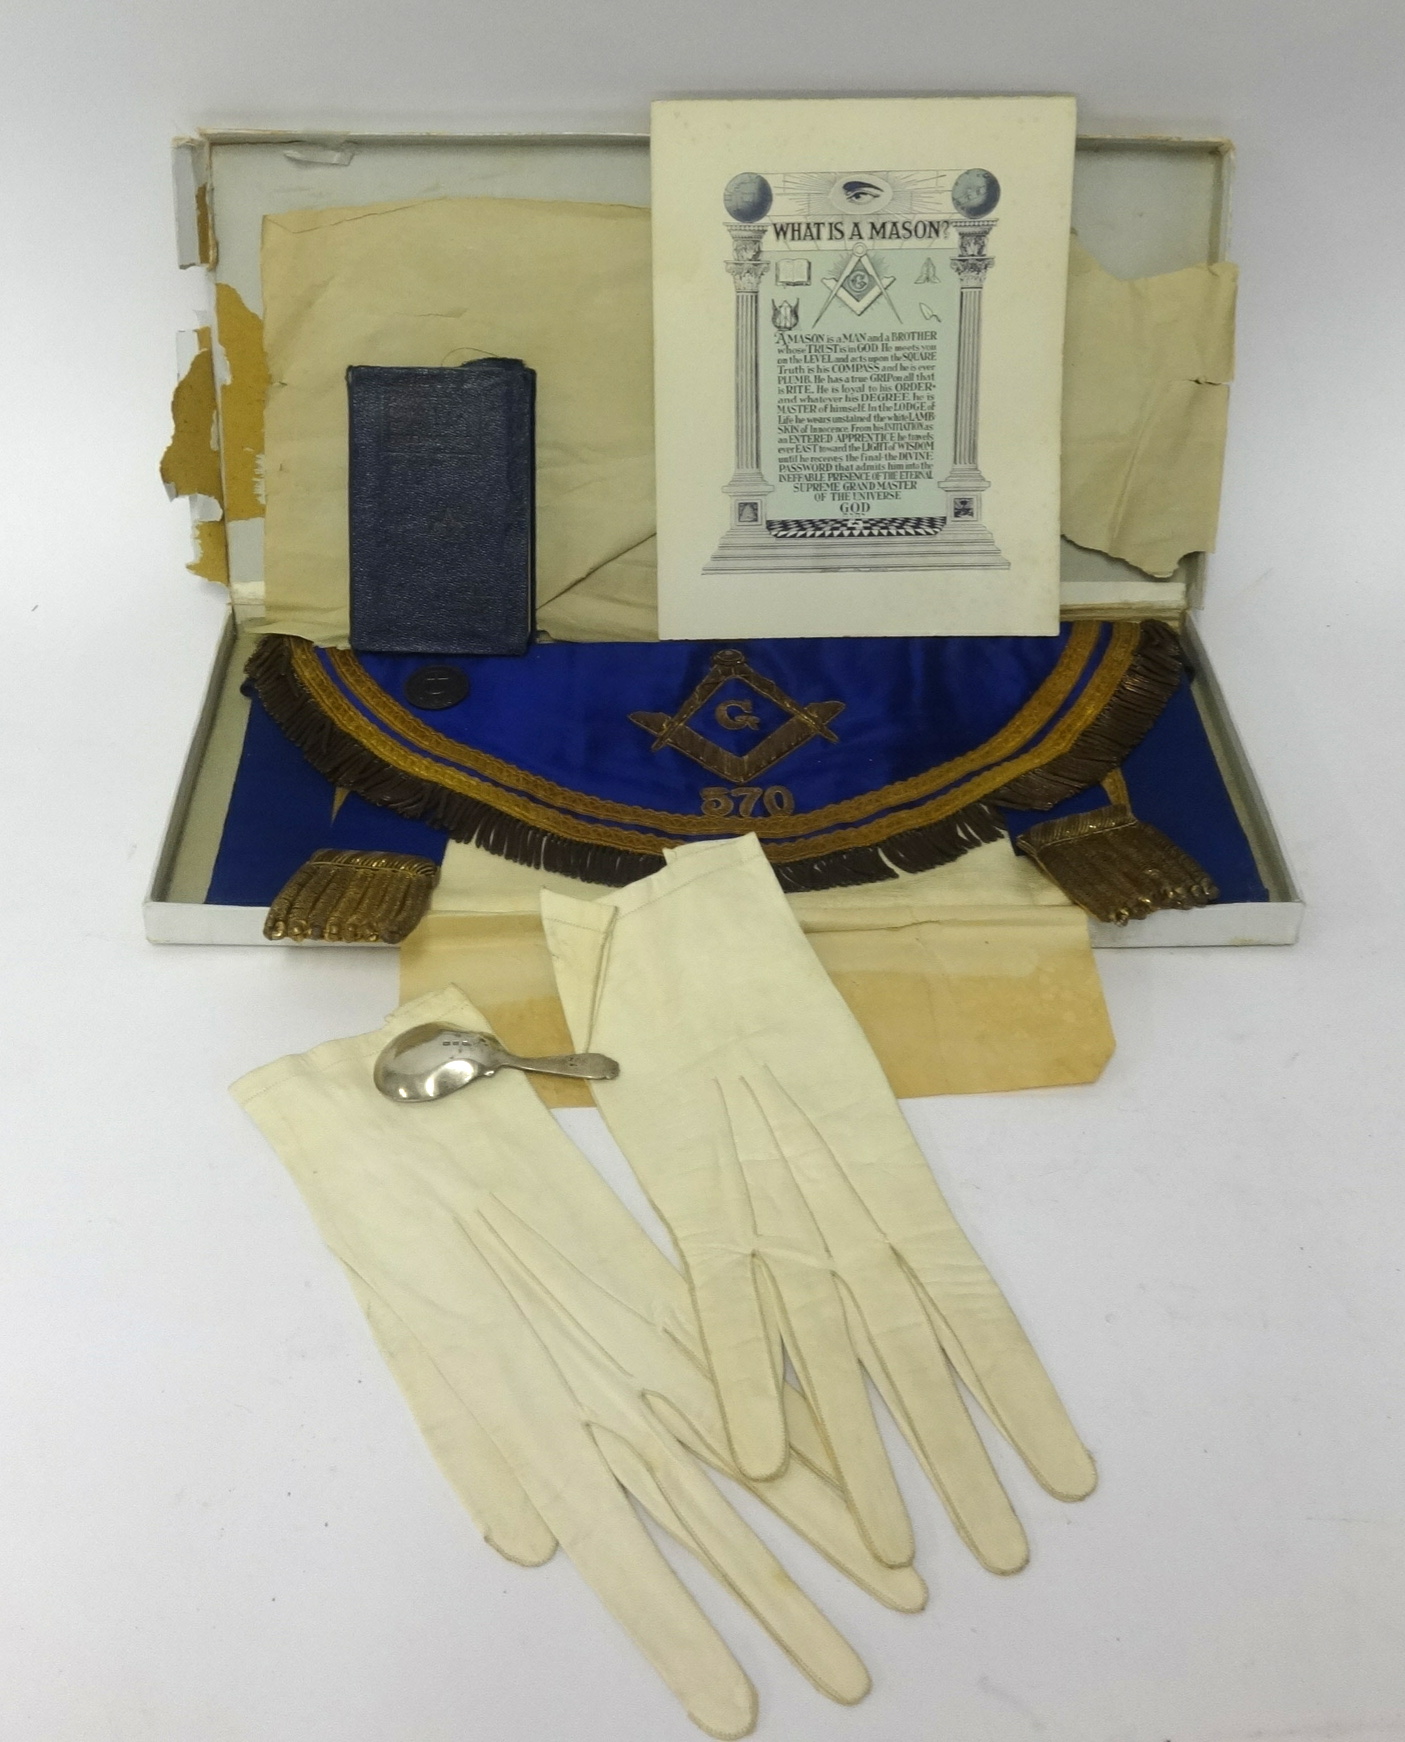 Of Masonic interest, an apron, gloves, booklet and also a silver caddy spoon.